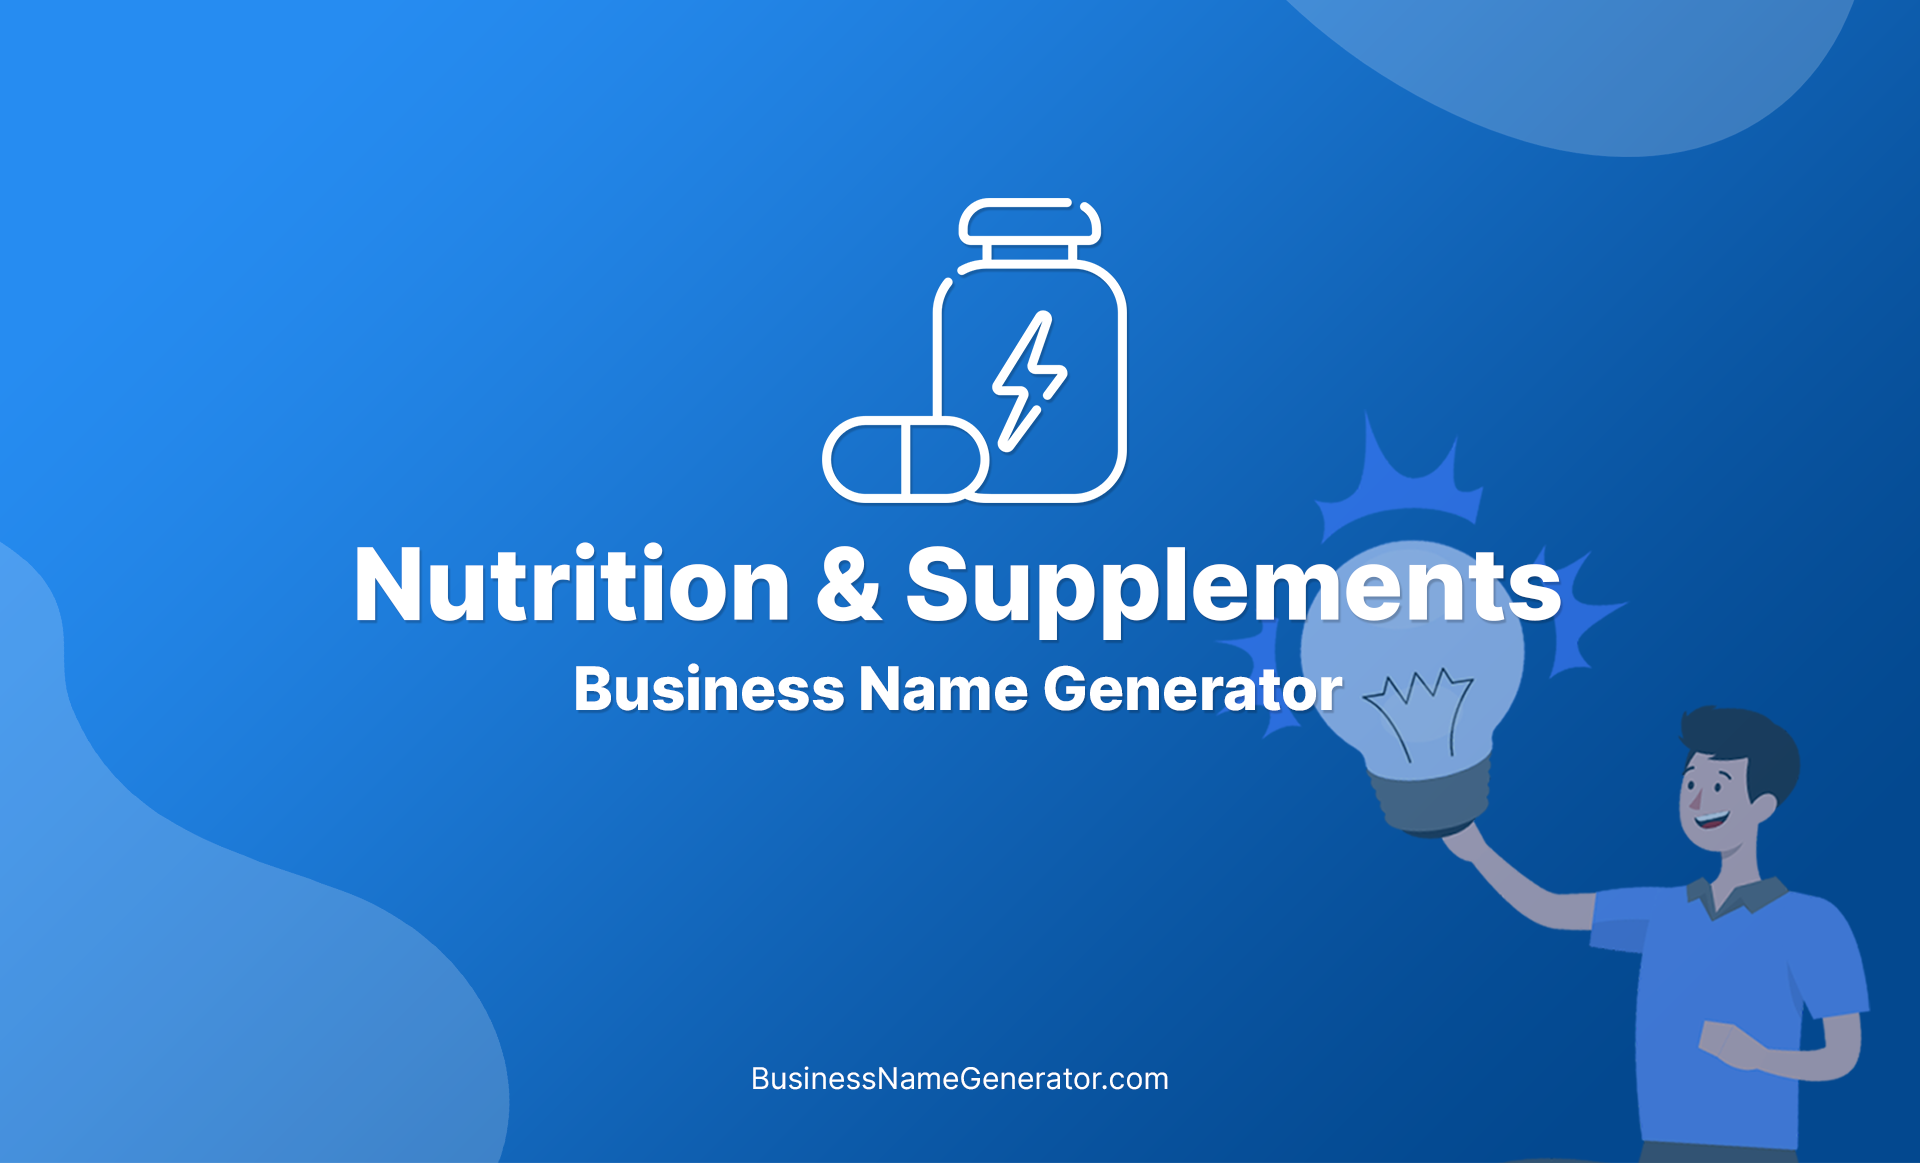 Nutrition & Supplements Business Name Generator